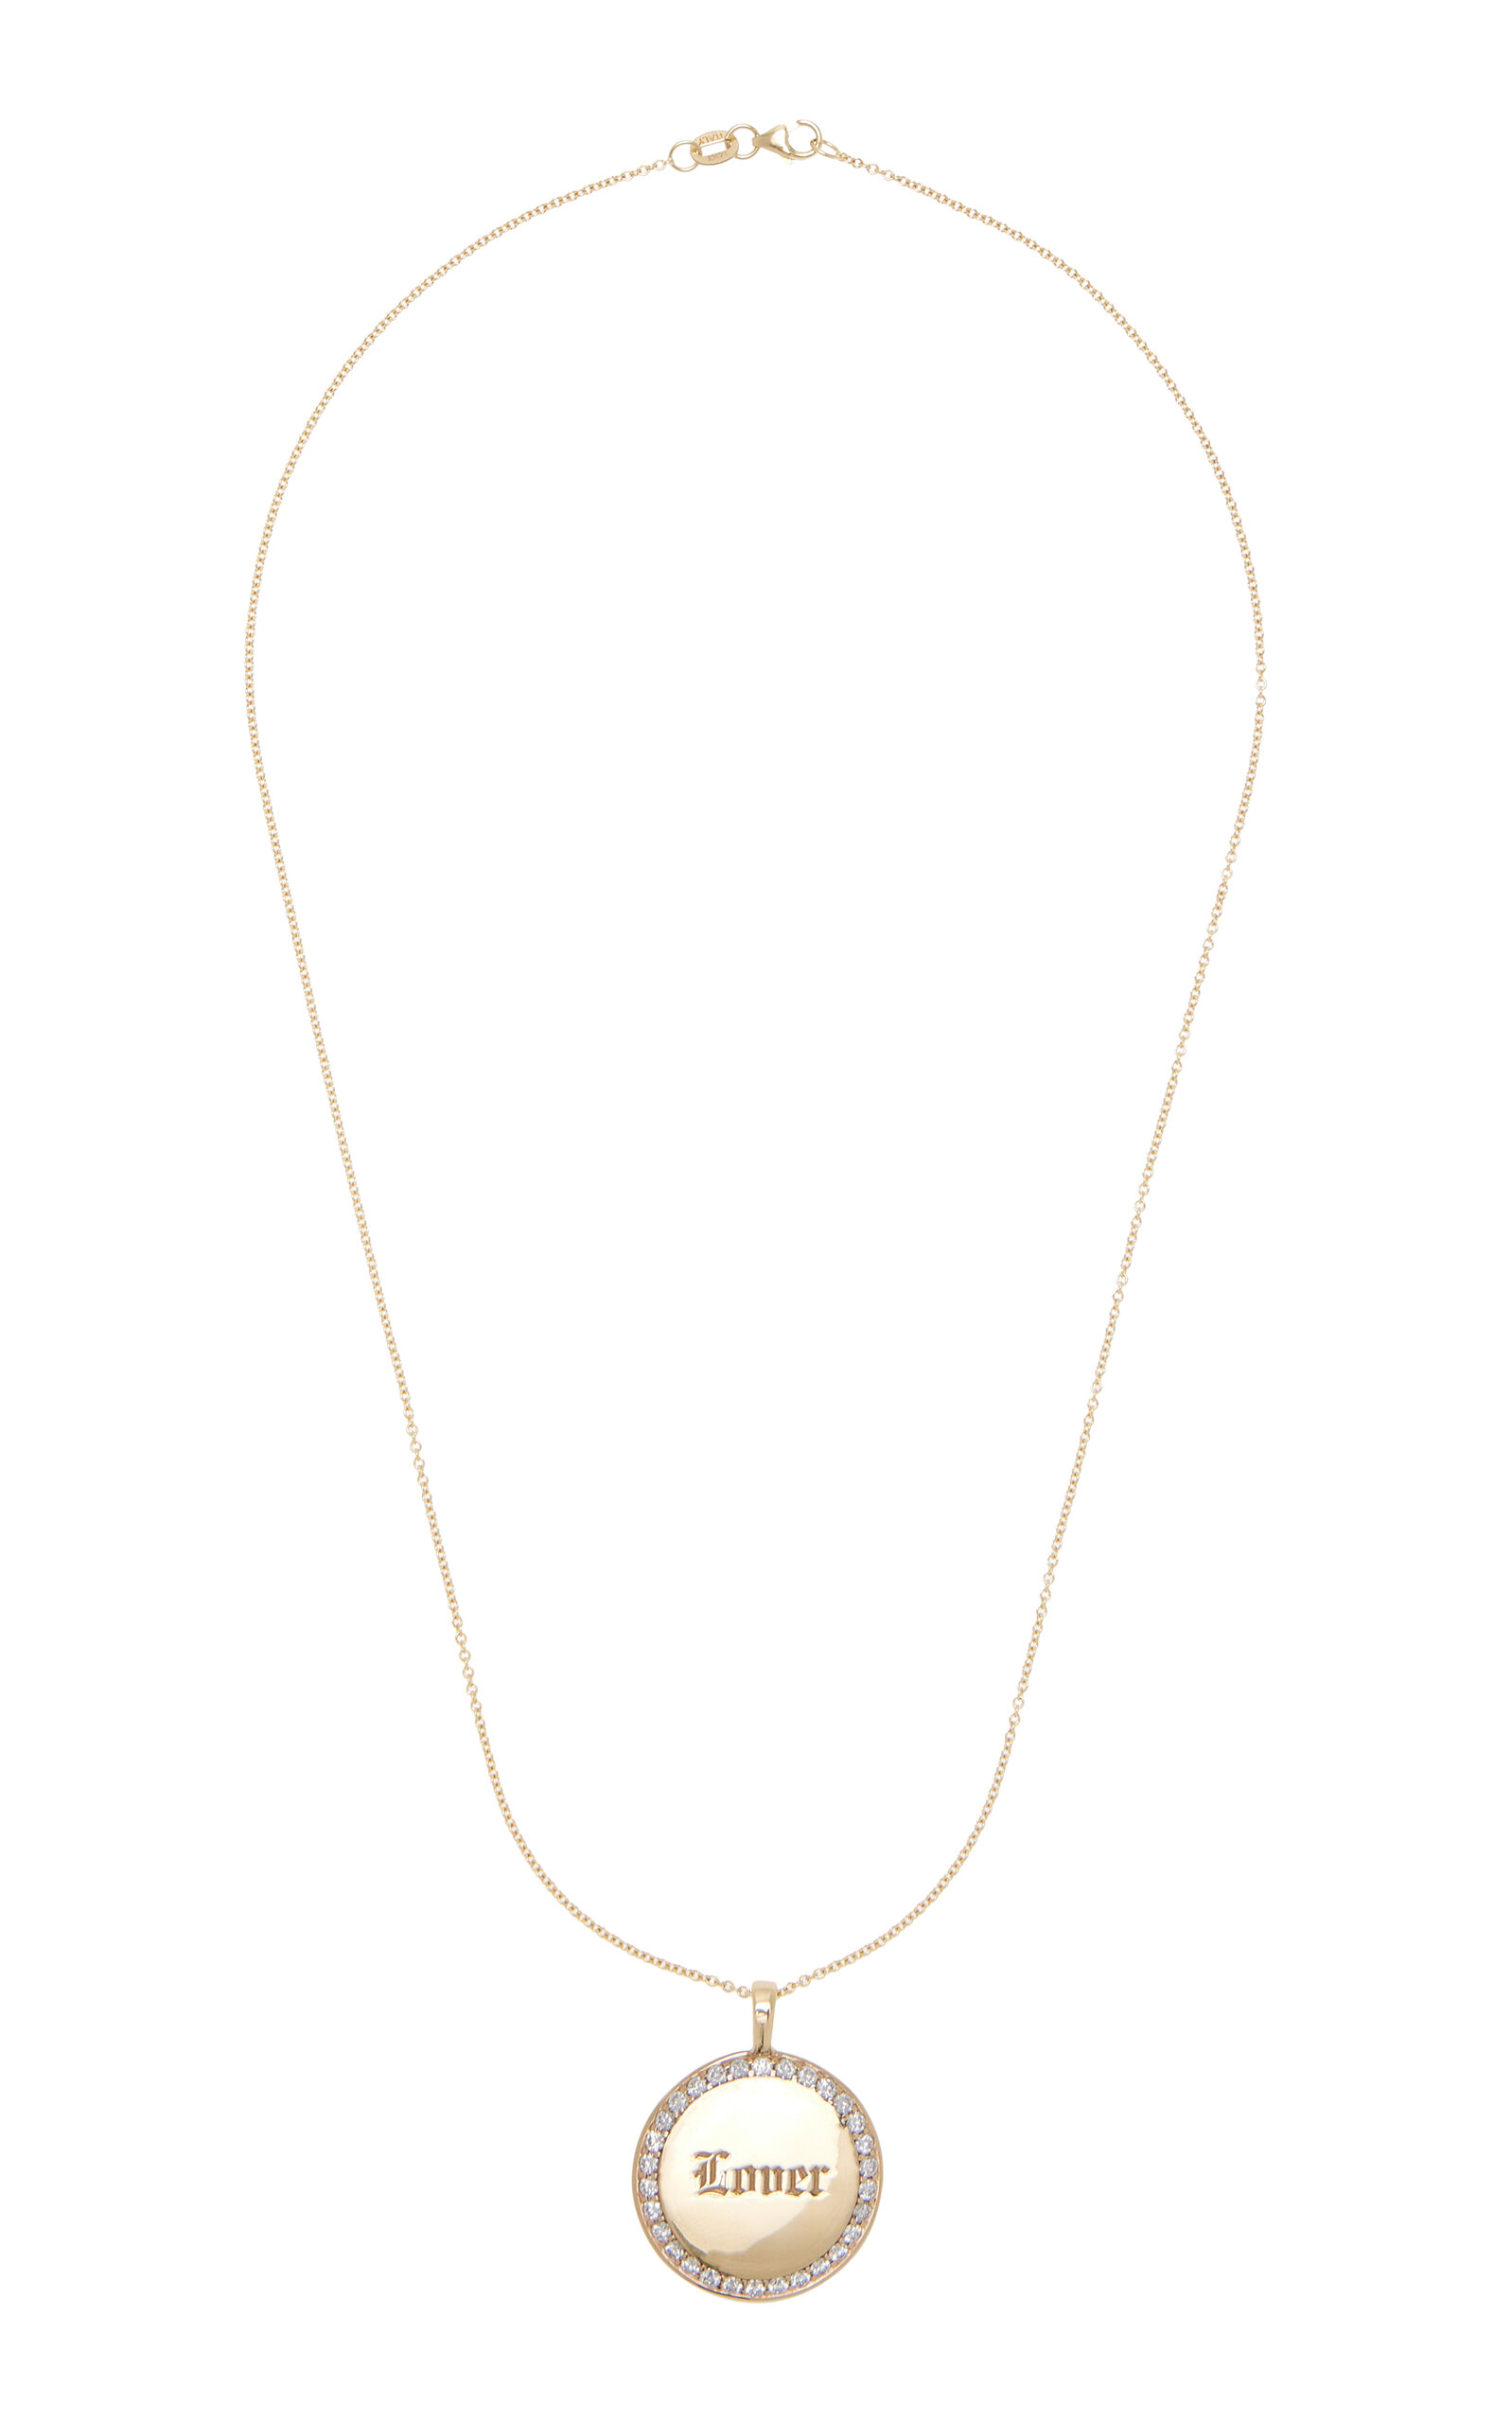 Lover/Fighter 14K Yellow Gold Diamond Necklace